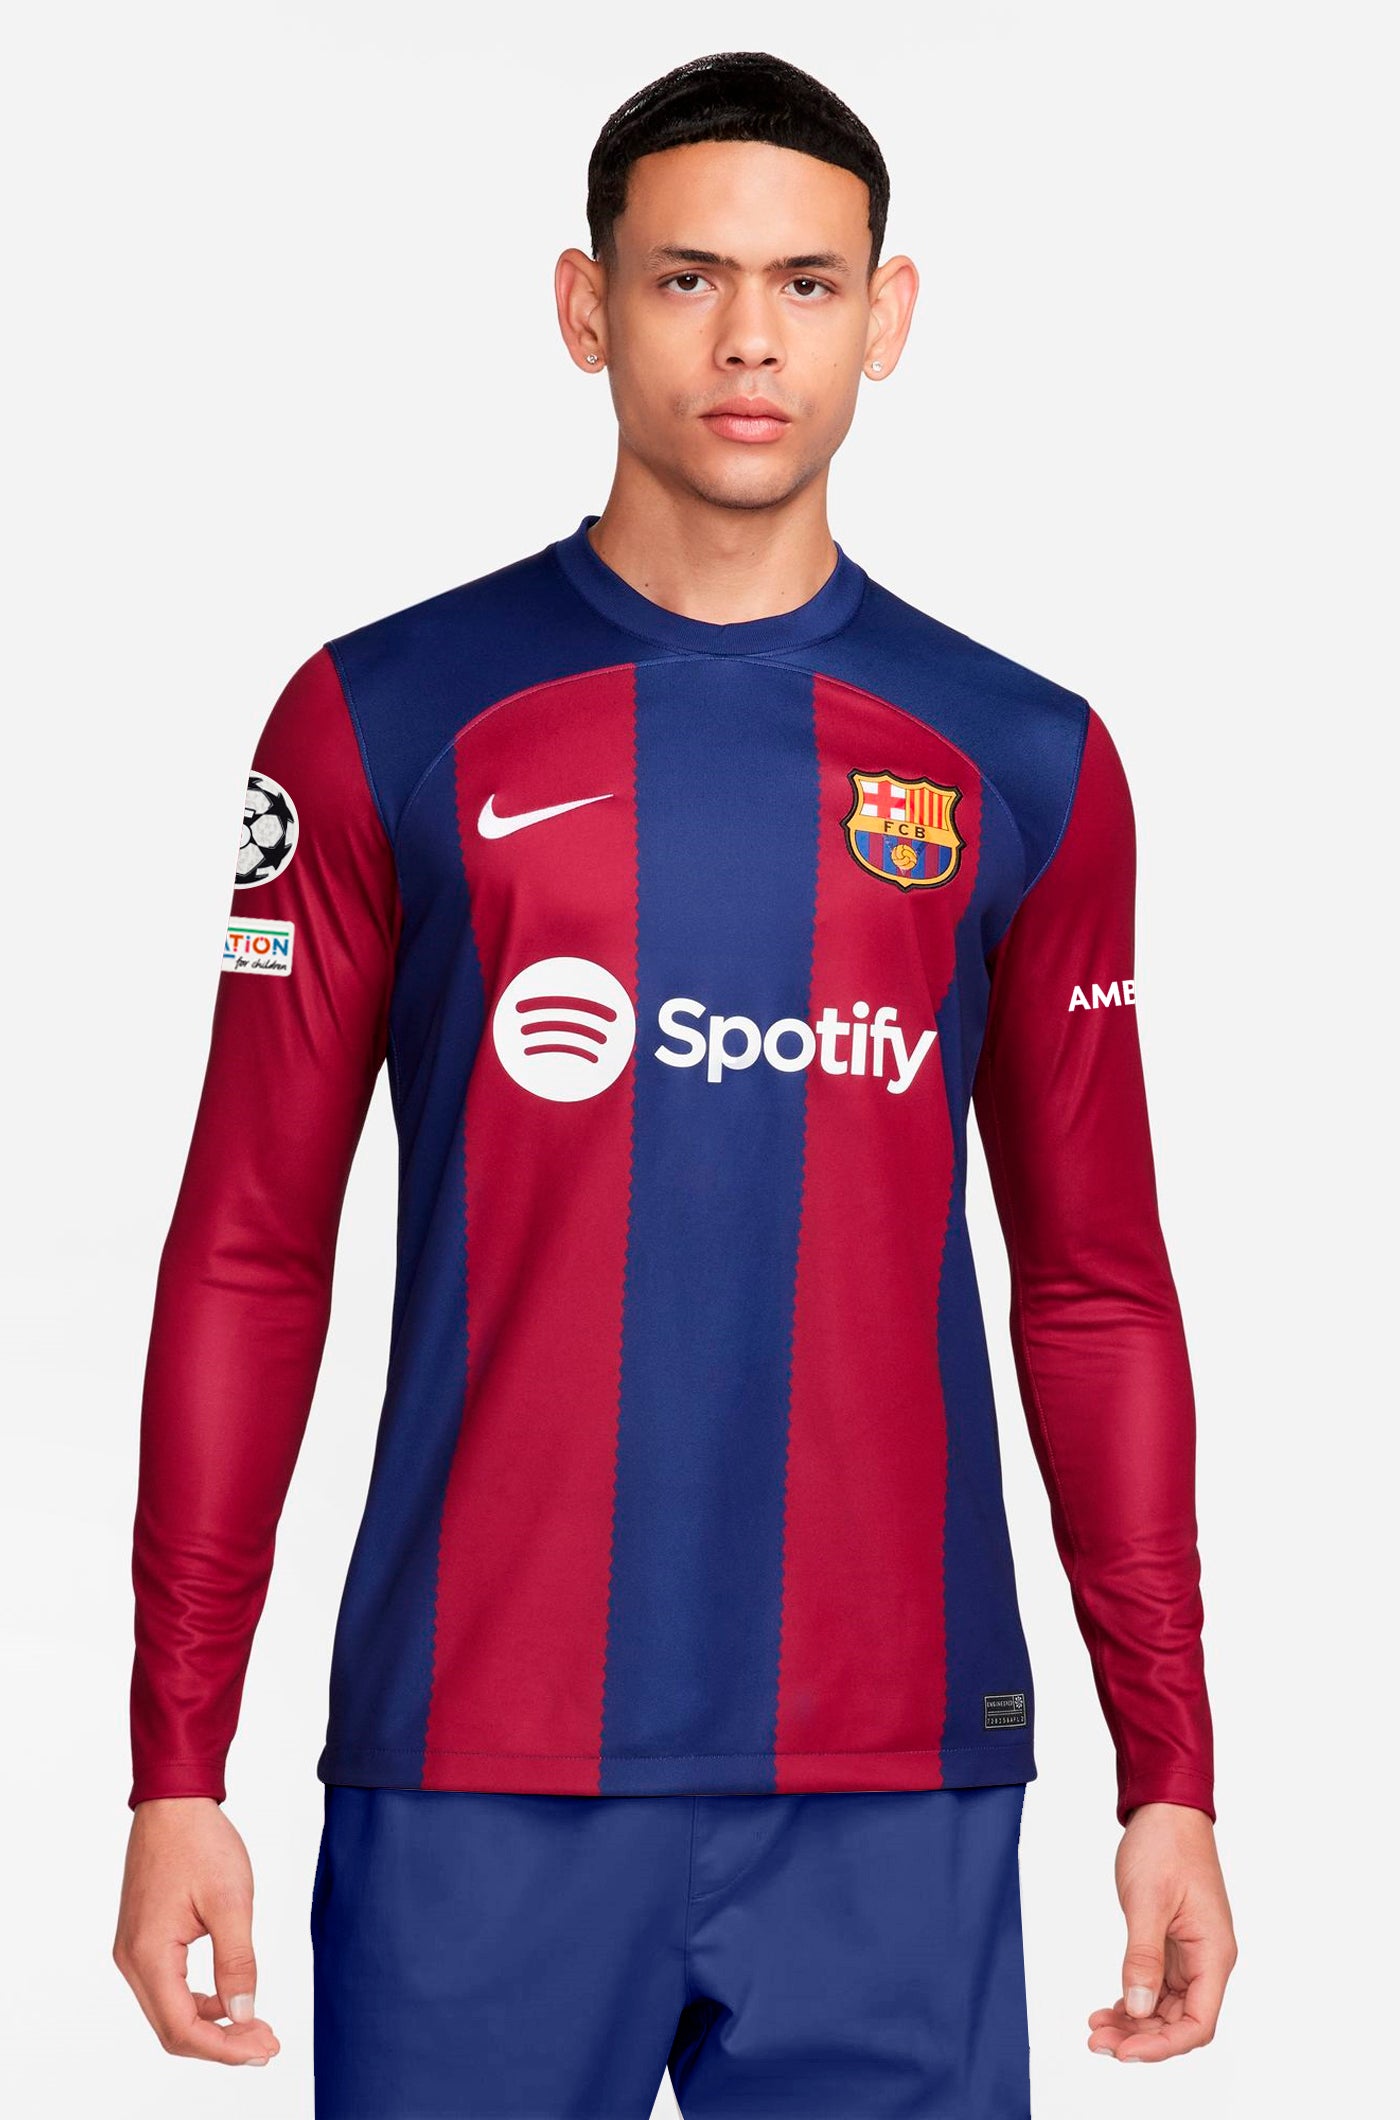 UCL FC Barcelona home shirt 23/24 - Long-sleeve - VITOR ROQUE